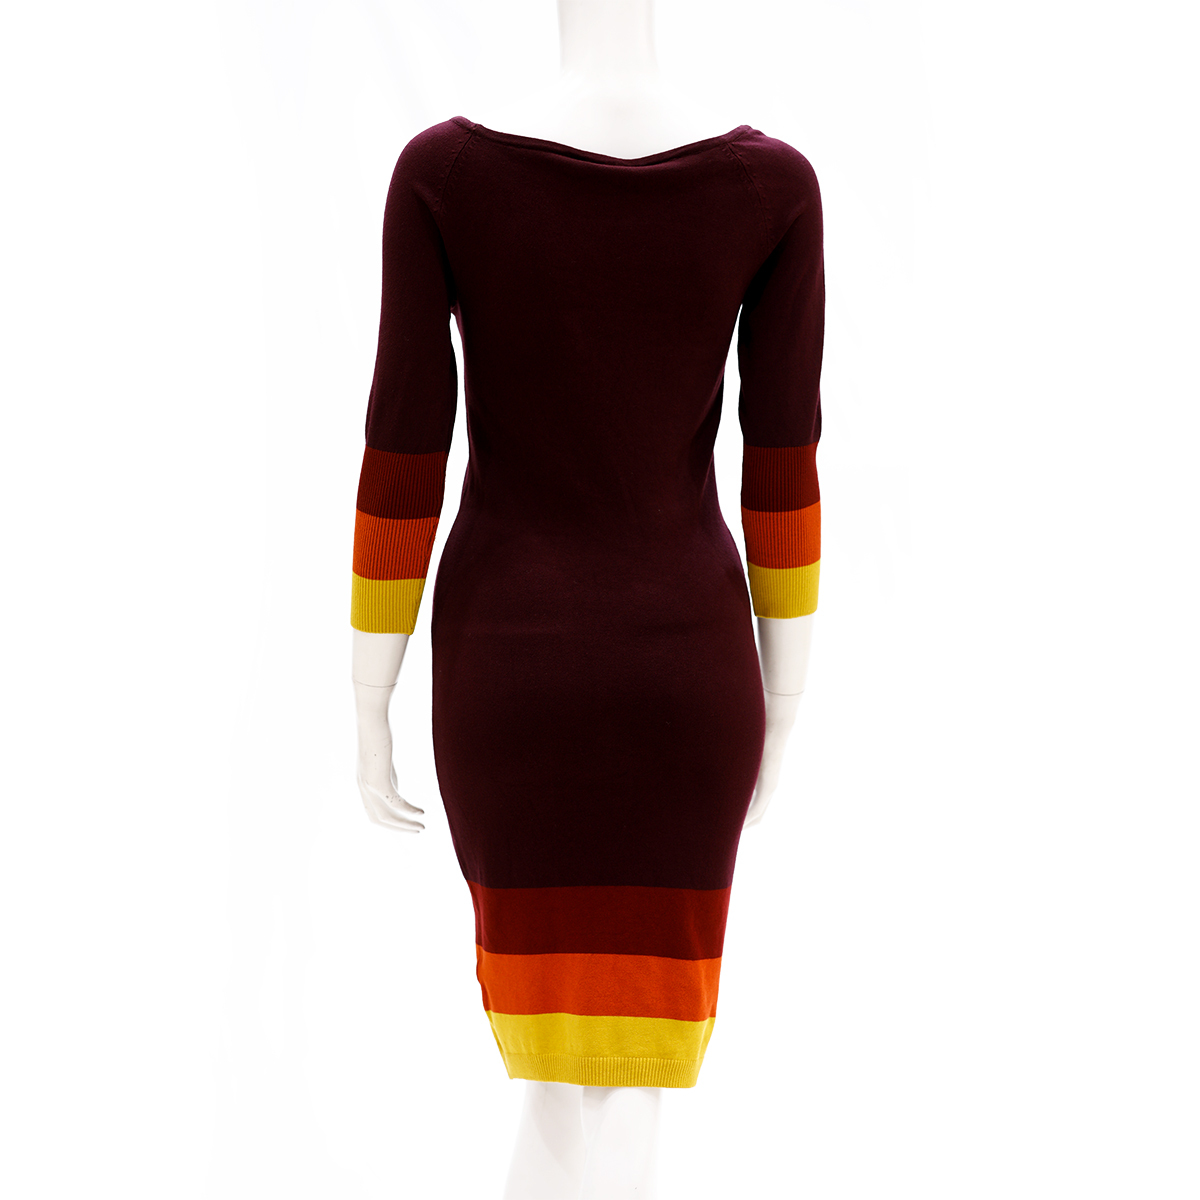 Sculler For Her Solid Sheath Knit Dress-Burgundy